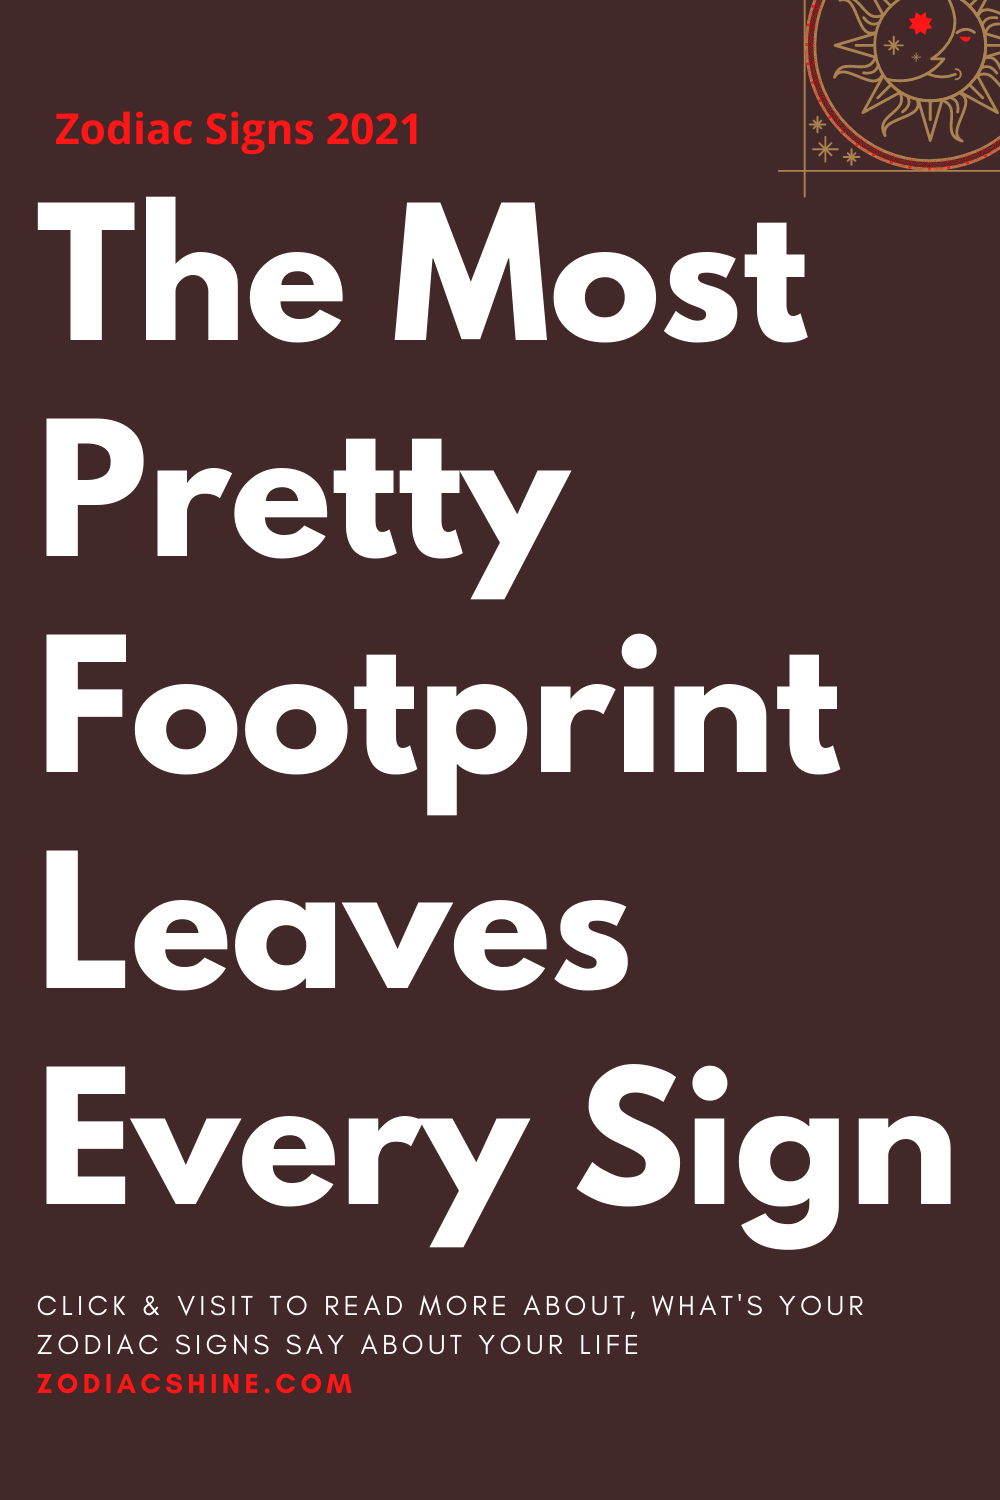 The Most Pretty Footprint Leaves Every Sign